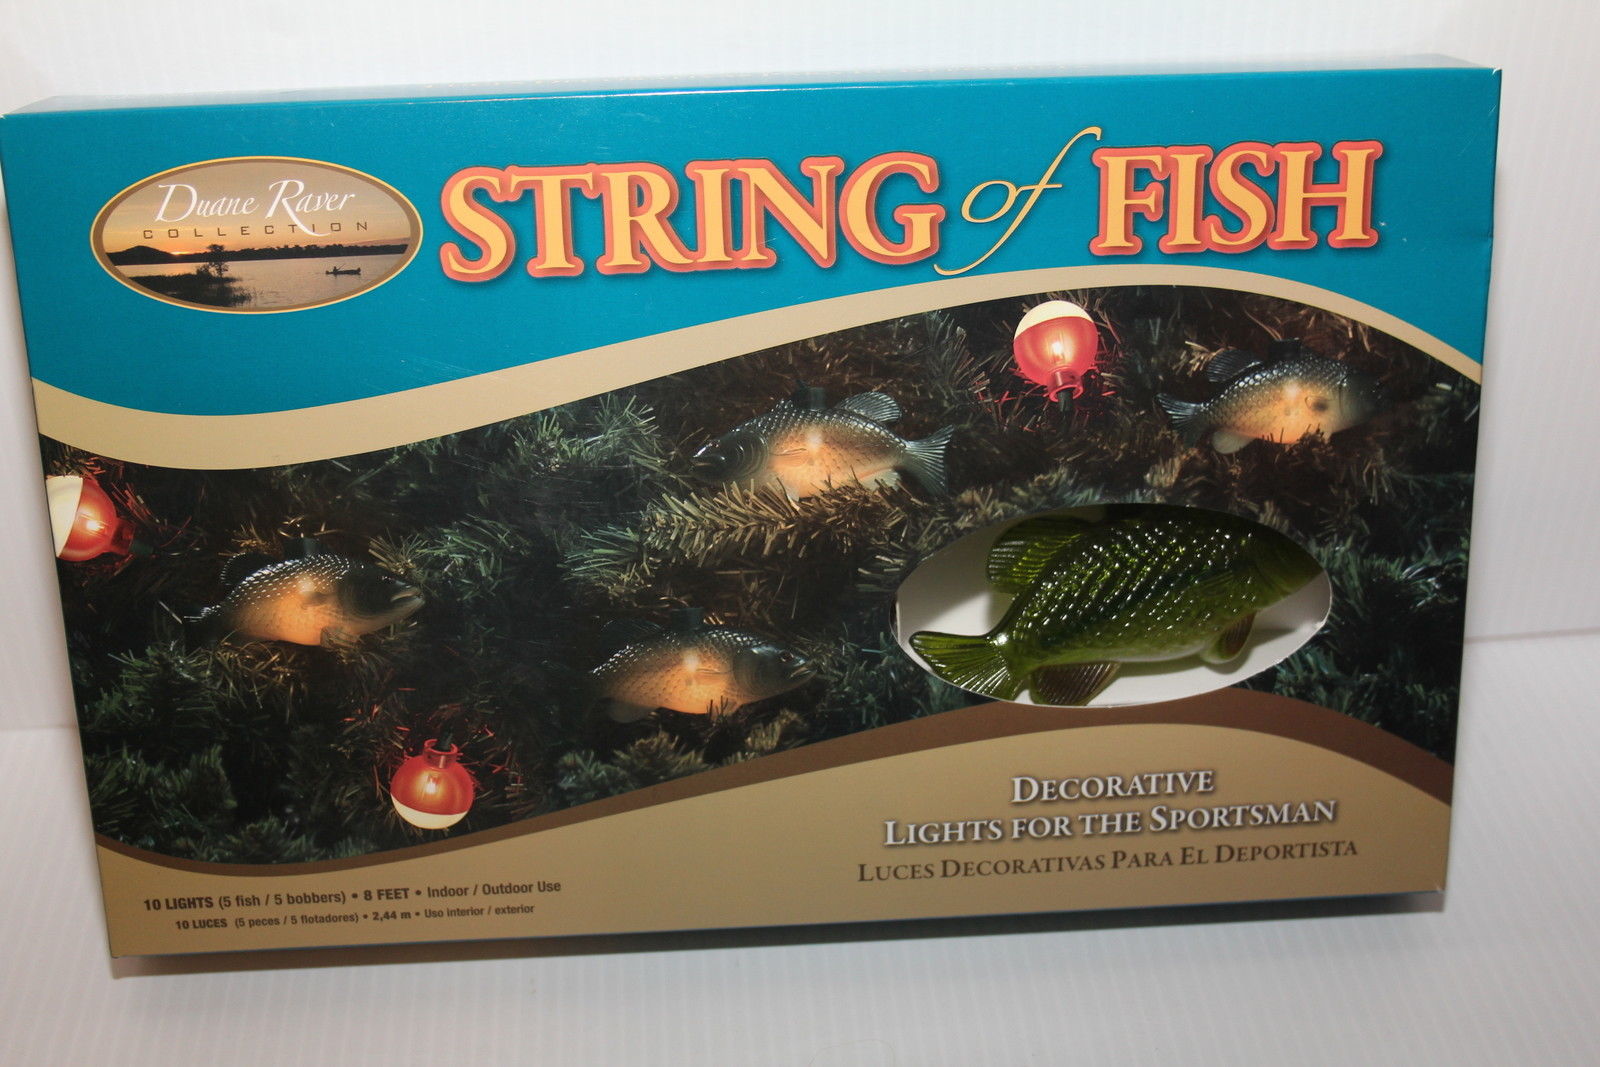 Duane Raver Collection String of Fish